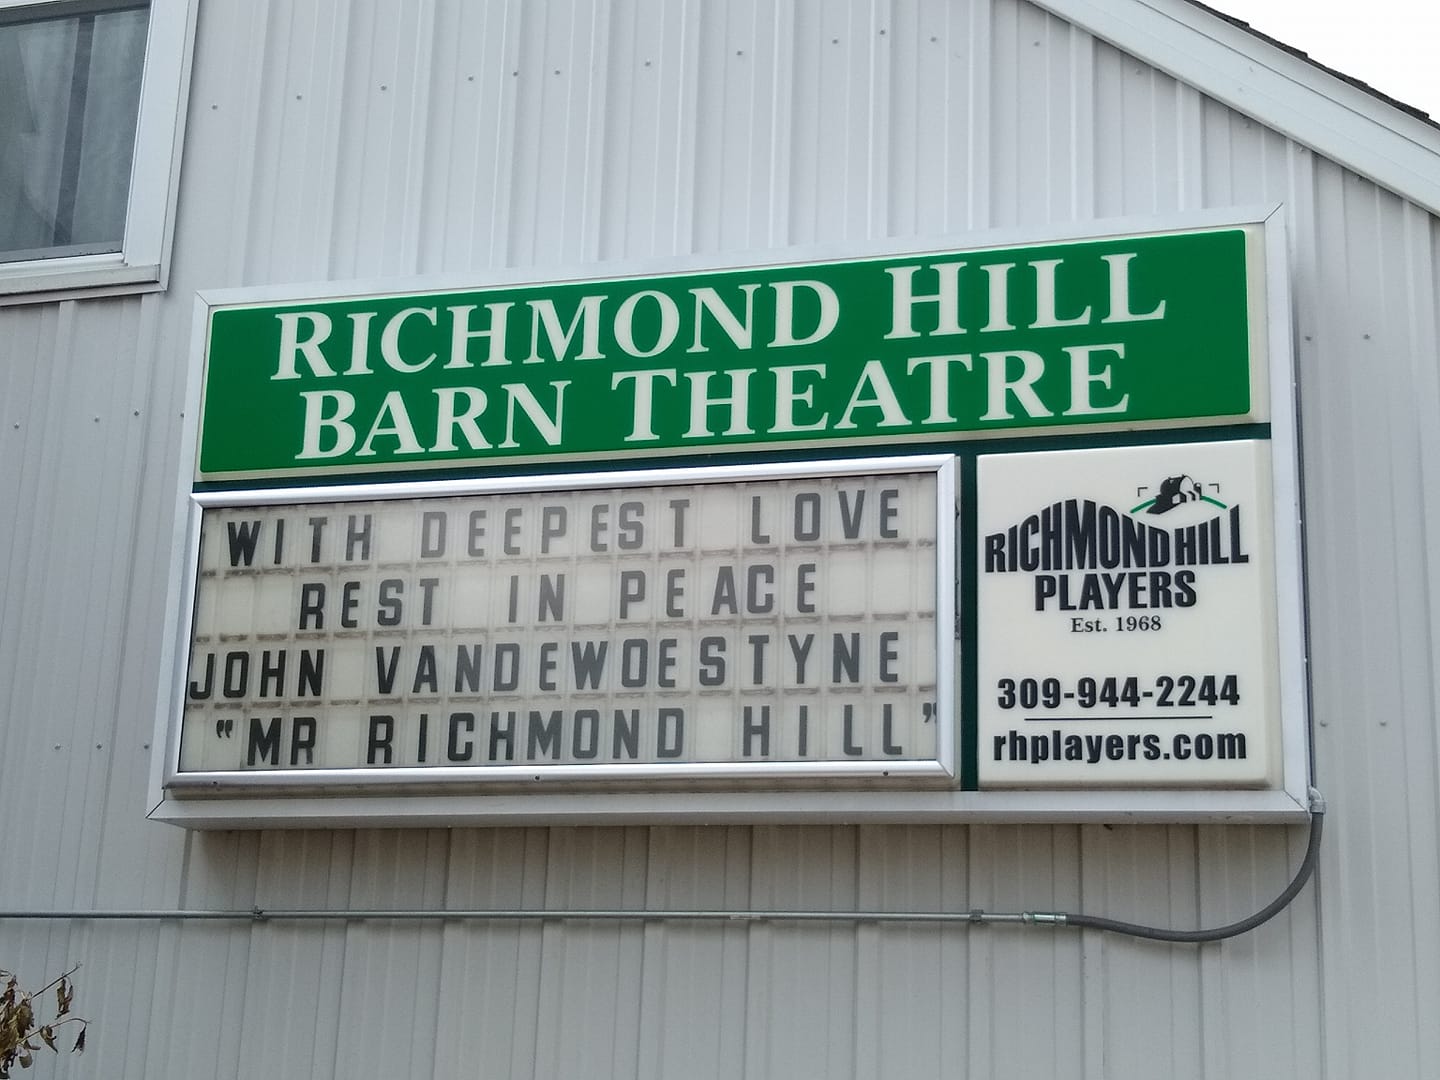 "Mr. Richmond Hill" was memorialized at the Barn Theatre after his death last year.